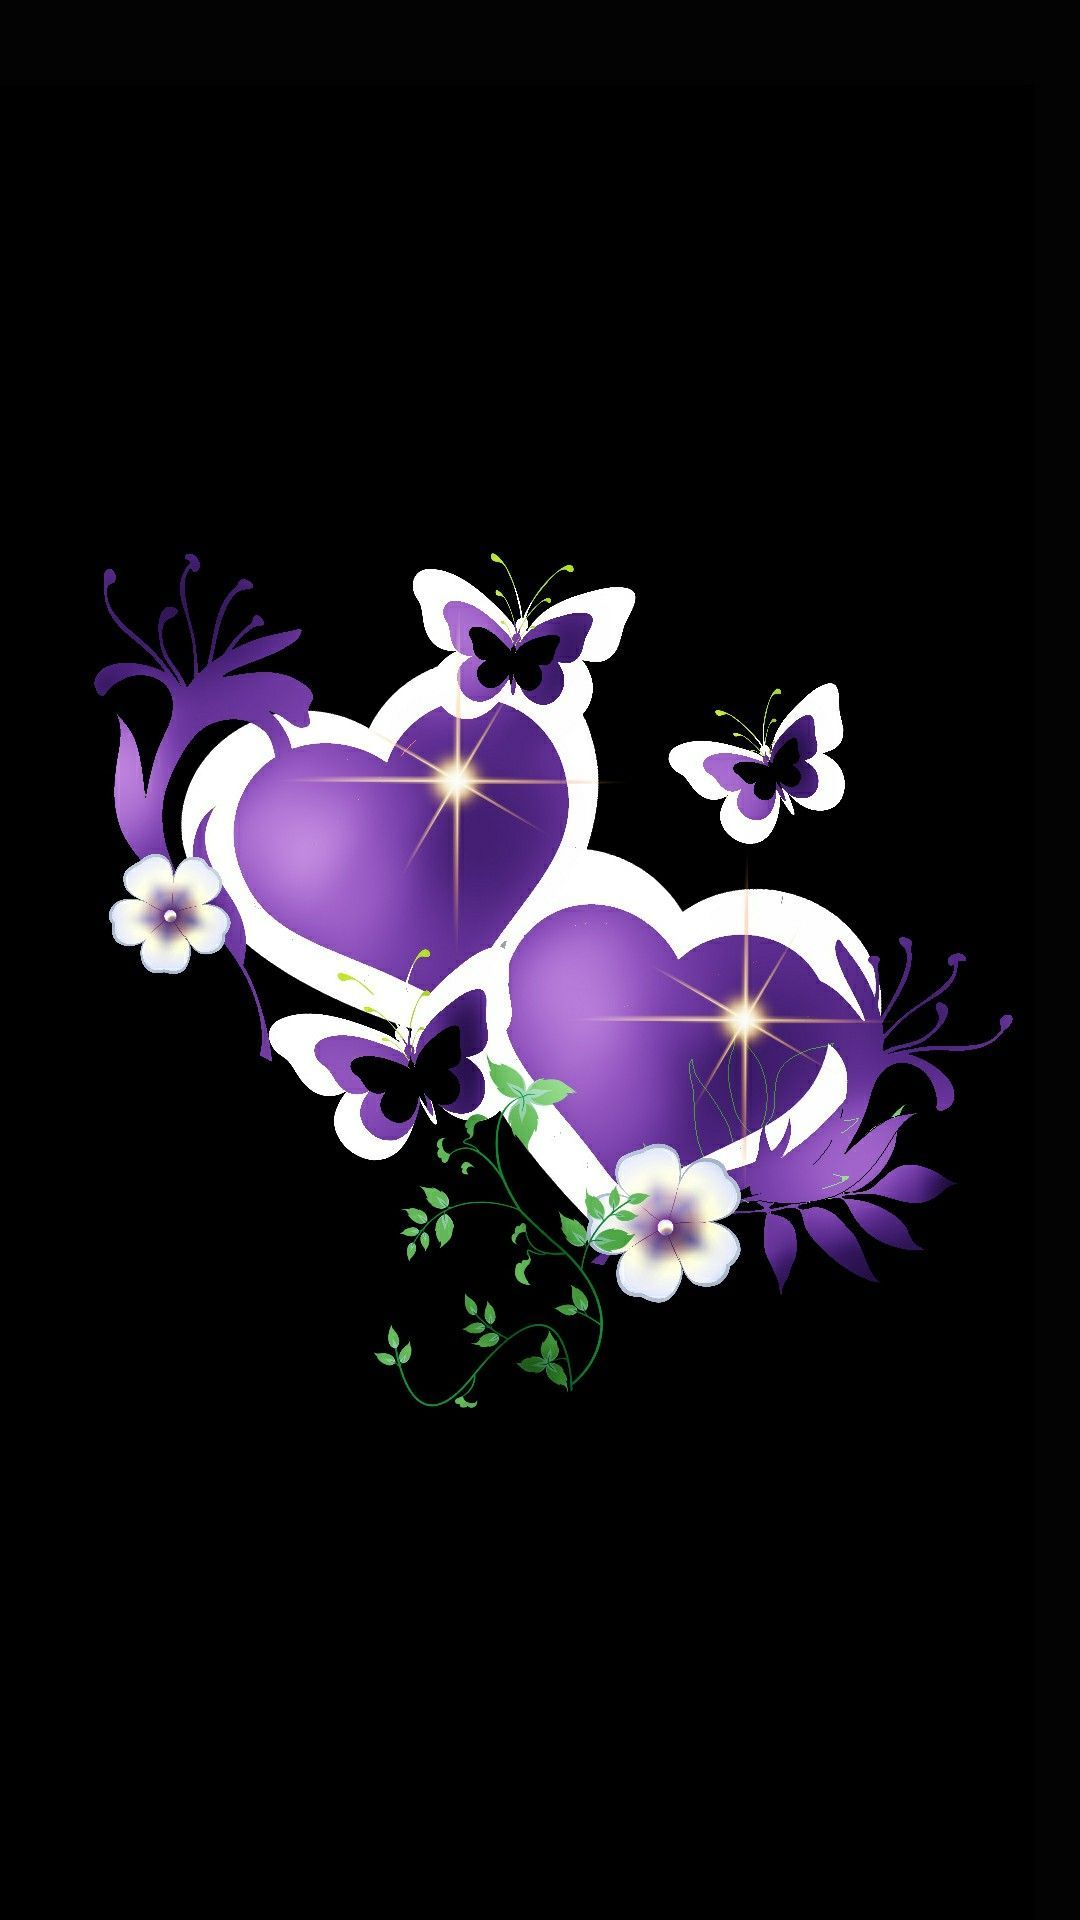 1080x1920 Hearts and Butterfly Wallpapers Top Free Hearts and Butterfly Backgrounds